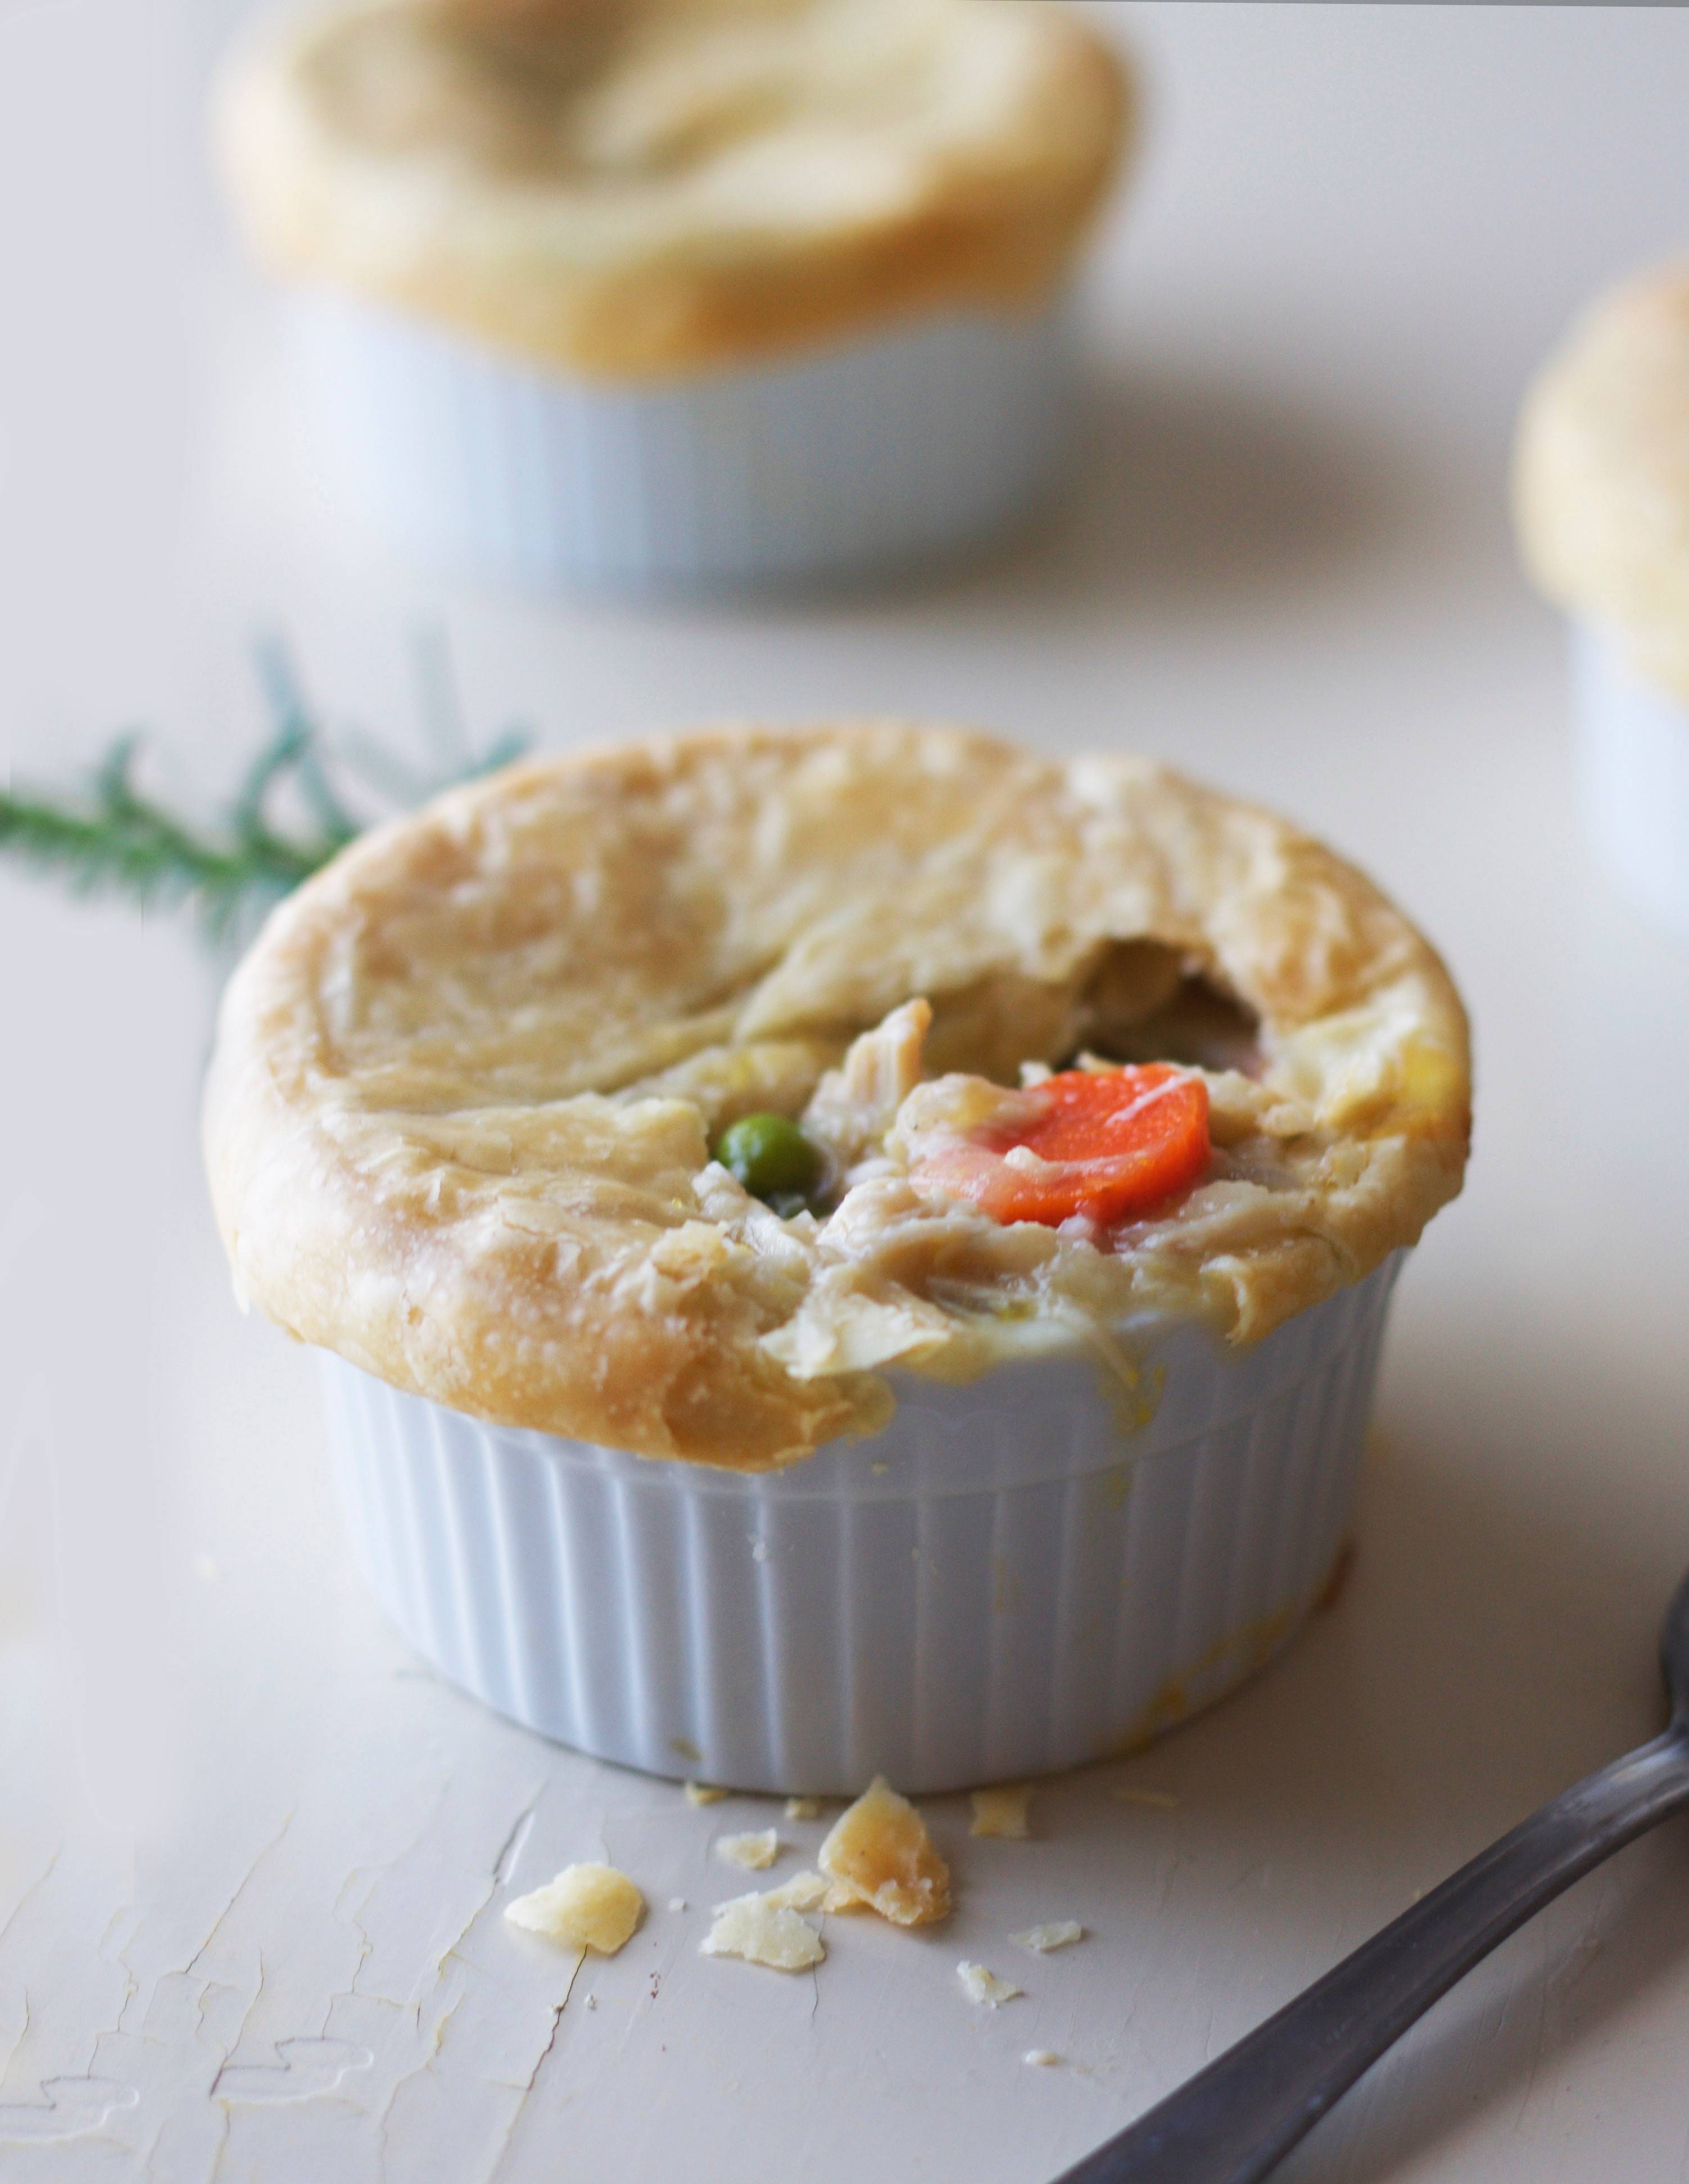 #1 Hearty Classic: The Best Chicken Pot Pie